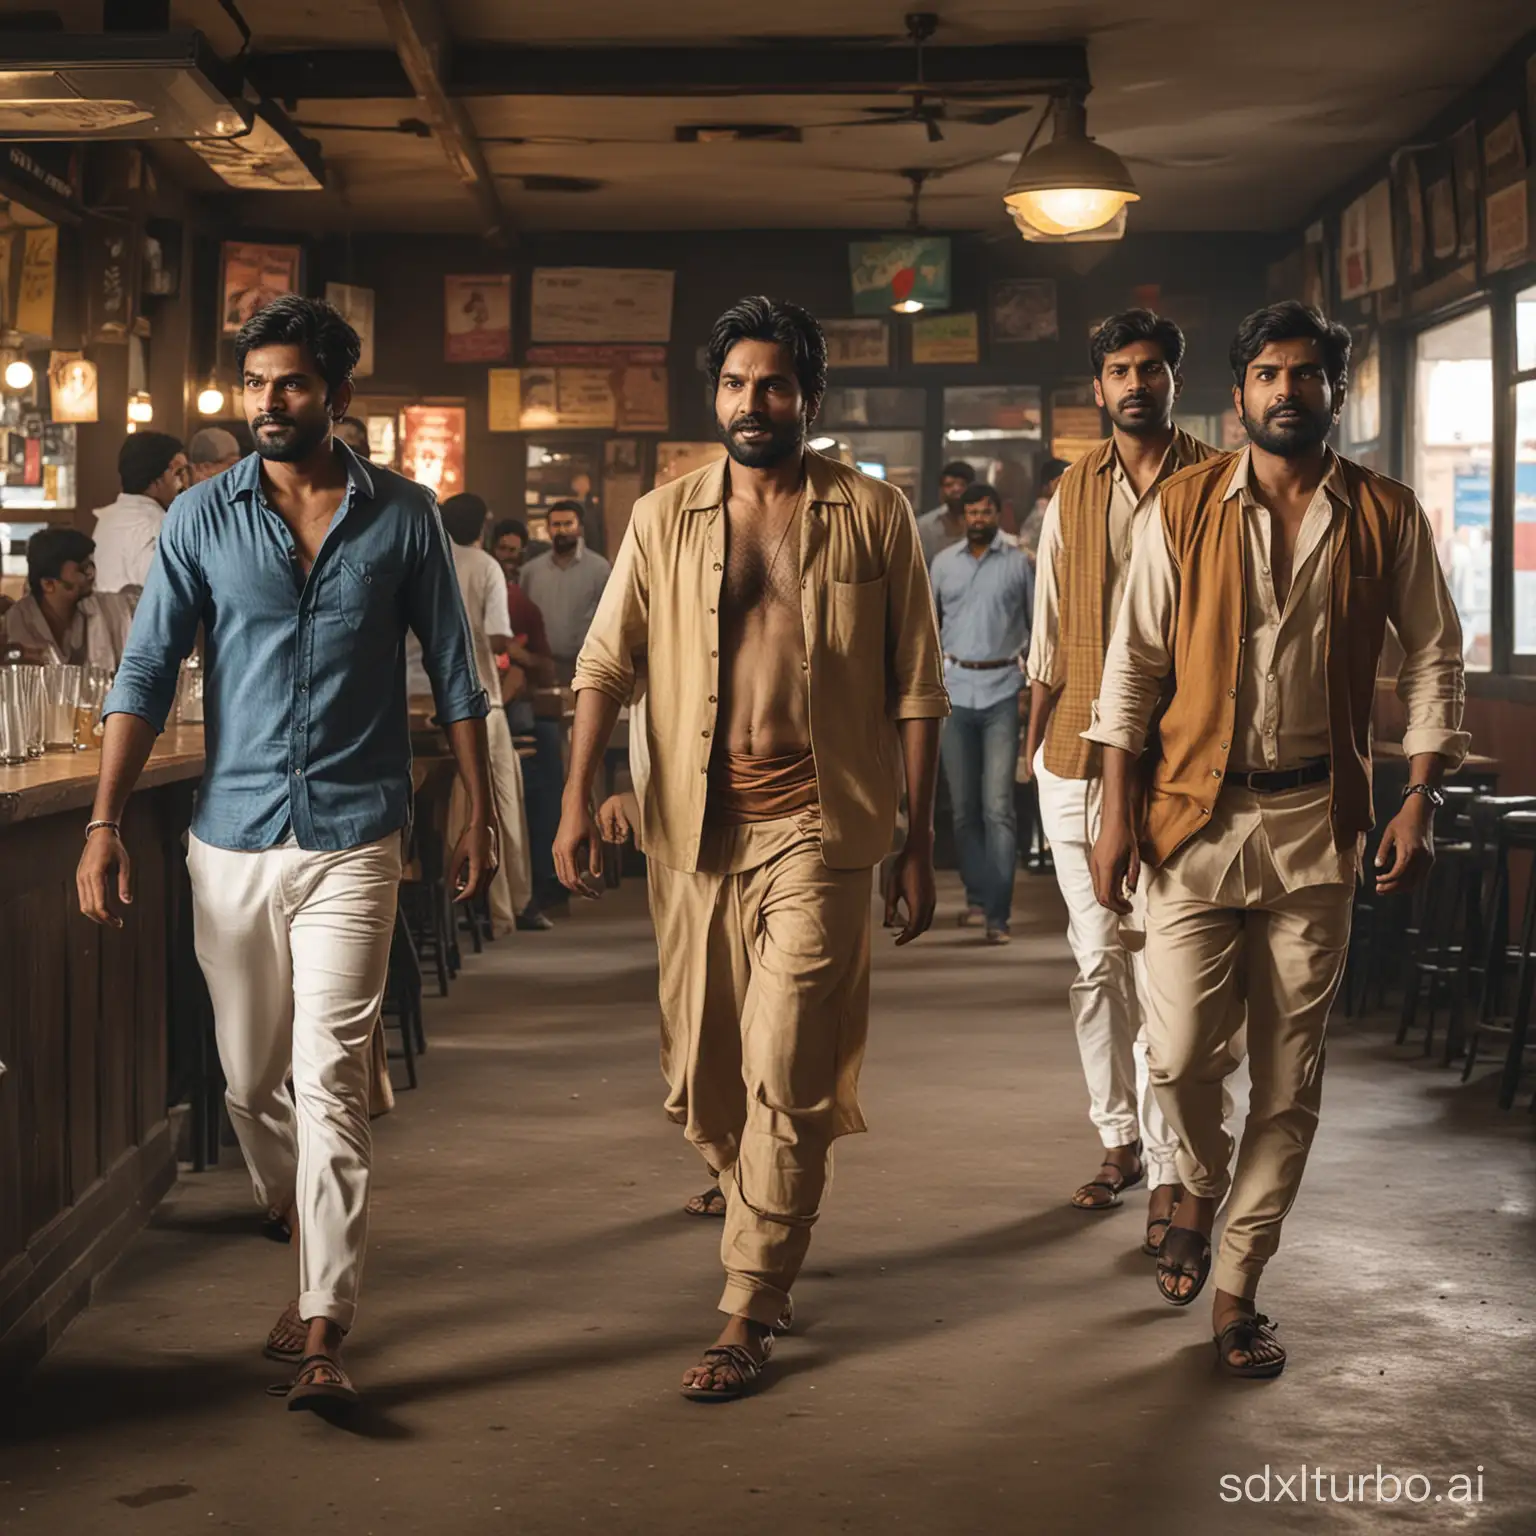 Four indian Rowdy walking angryly in a bar